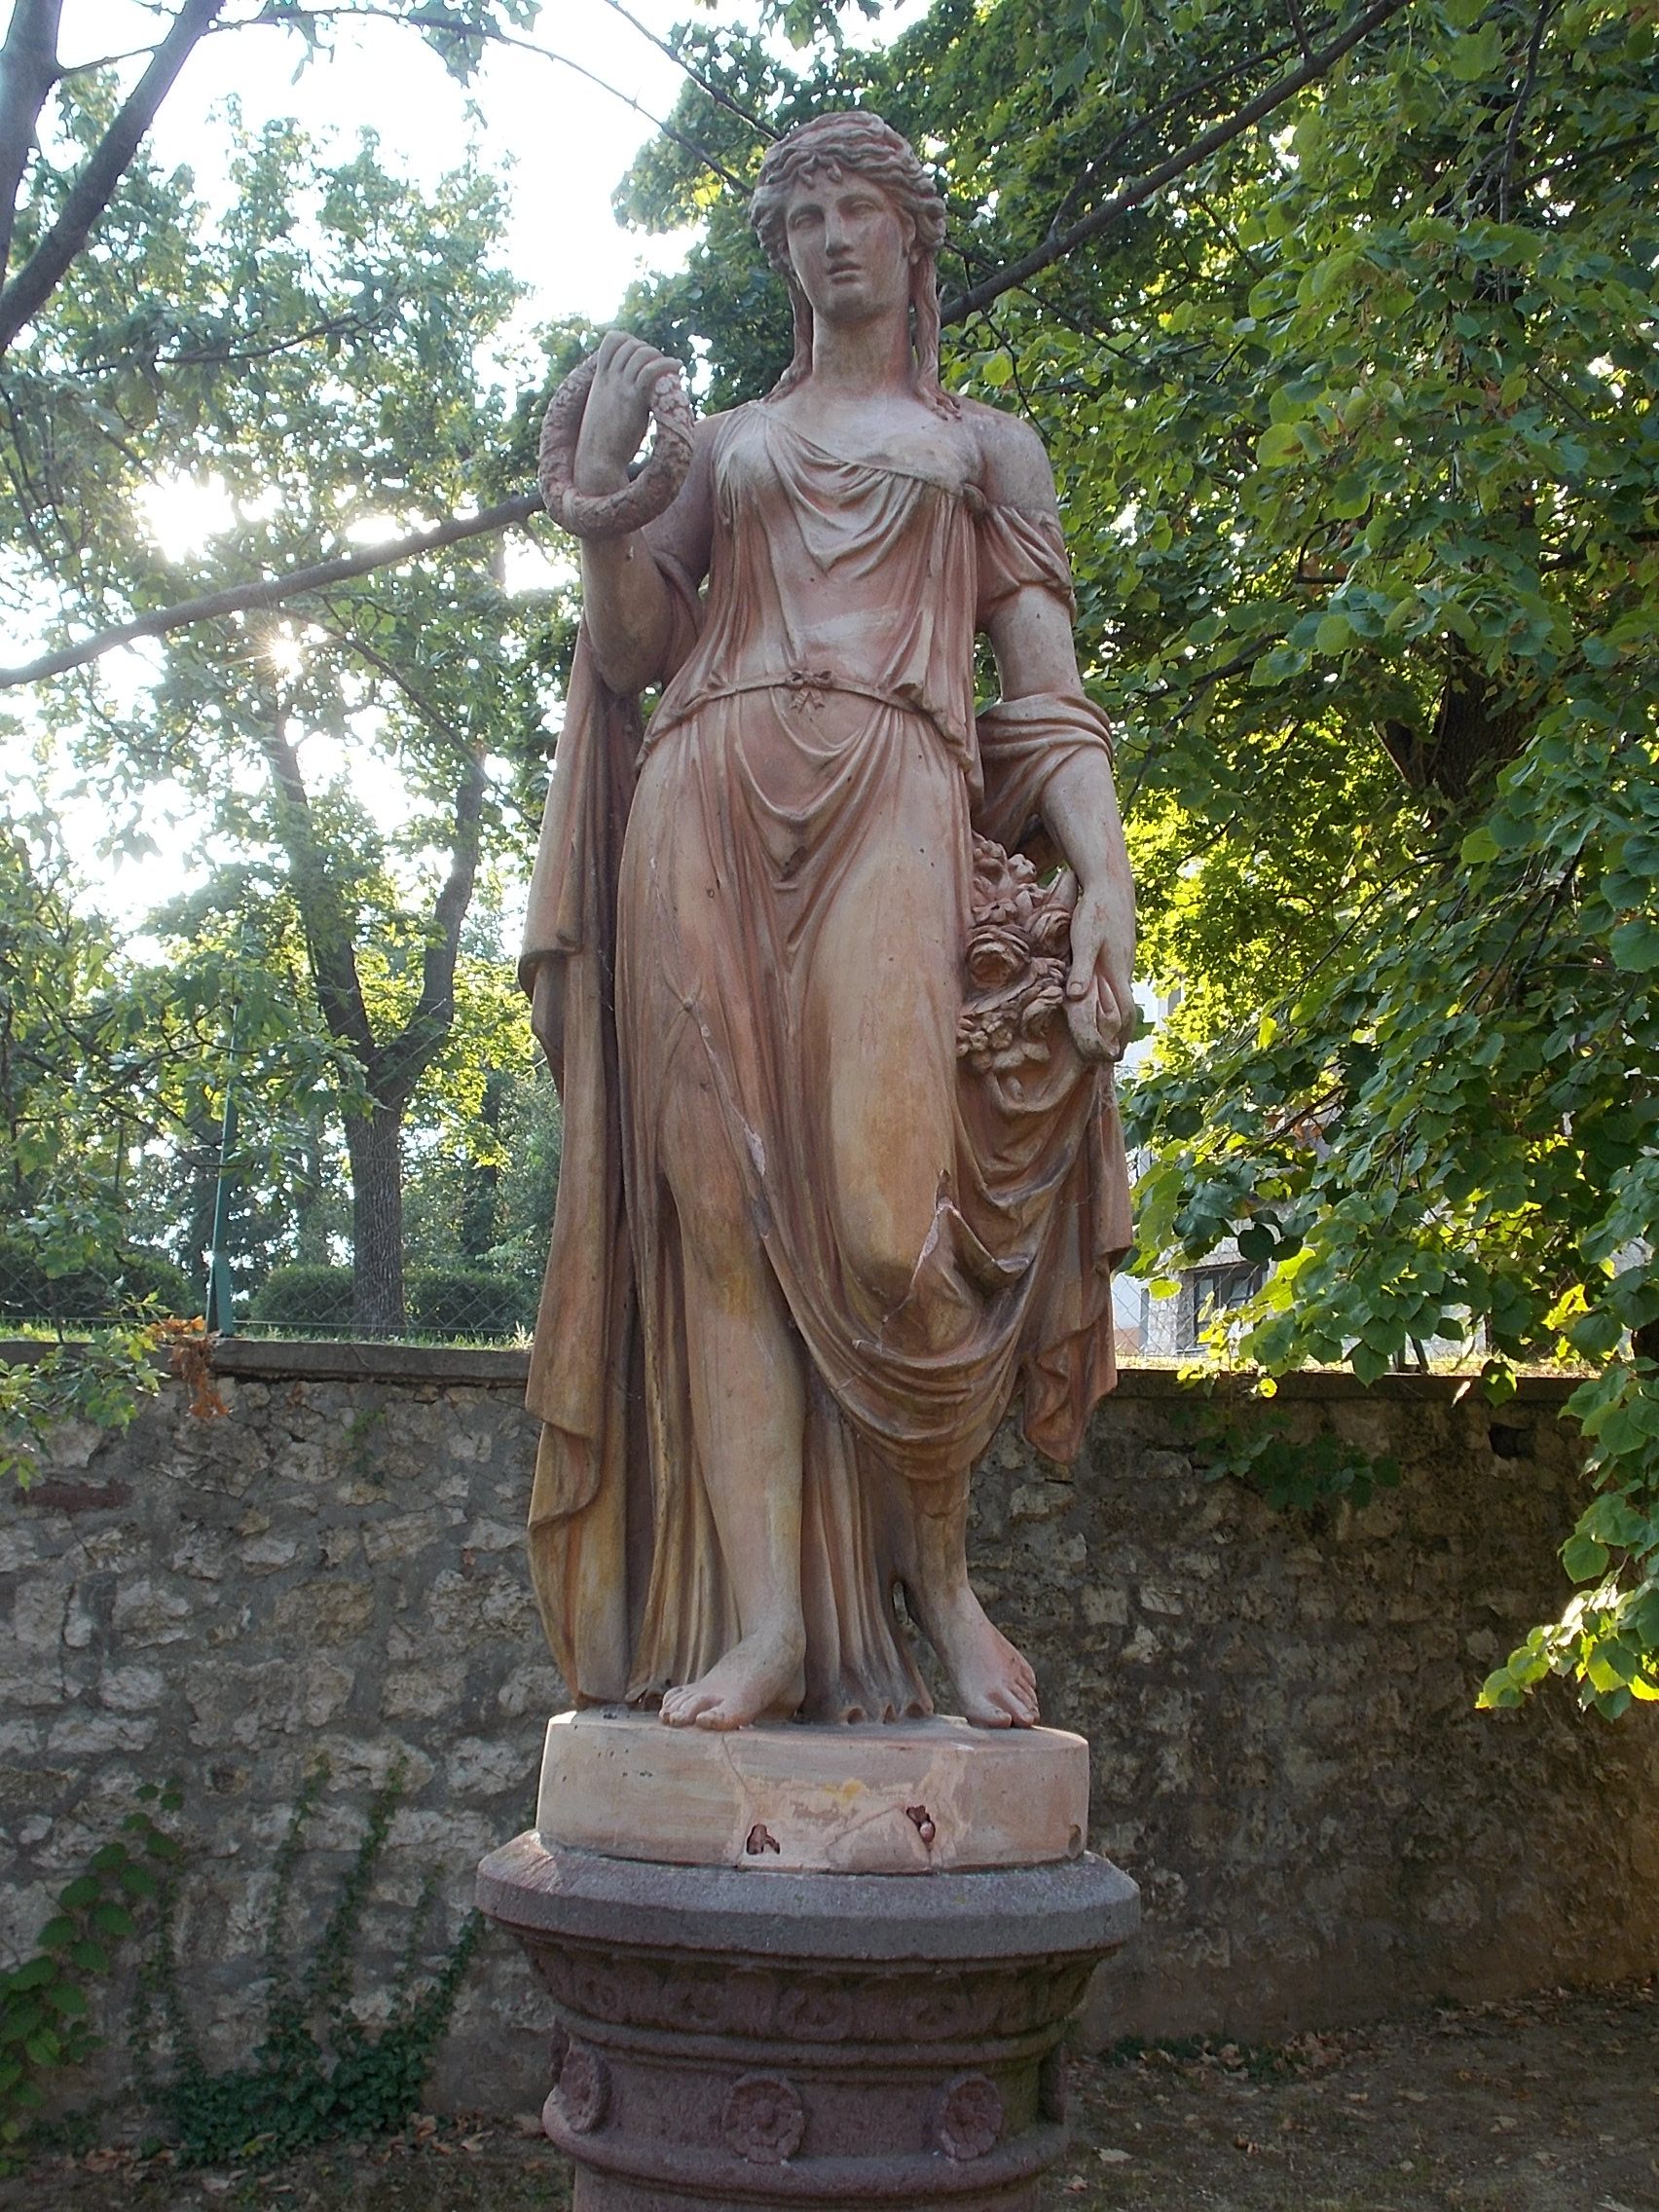 Statues of Flora such as this one in Hungary show the ancient devotion to the goddess.